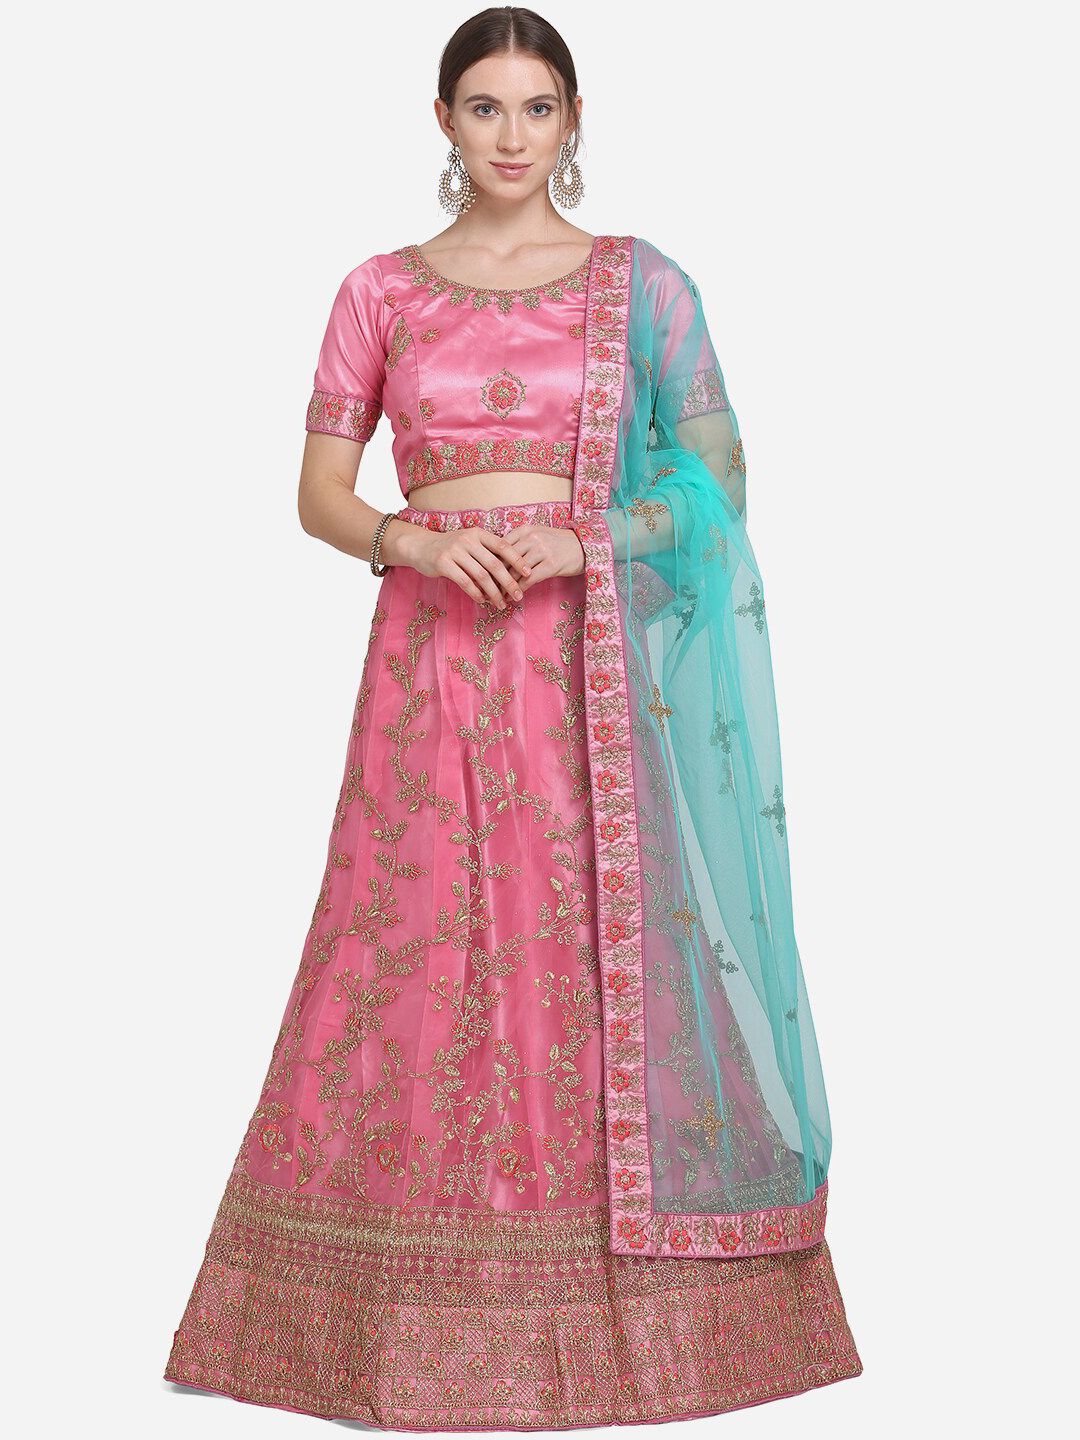 VRSALES Pink & Blue Embroidered Semi-Stitched Lehenga & Unstitched Blouse with Dupatta Price in India